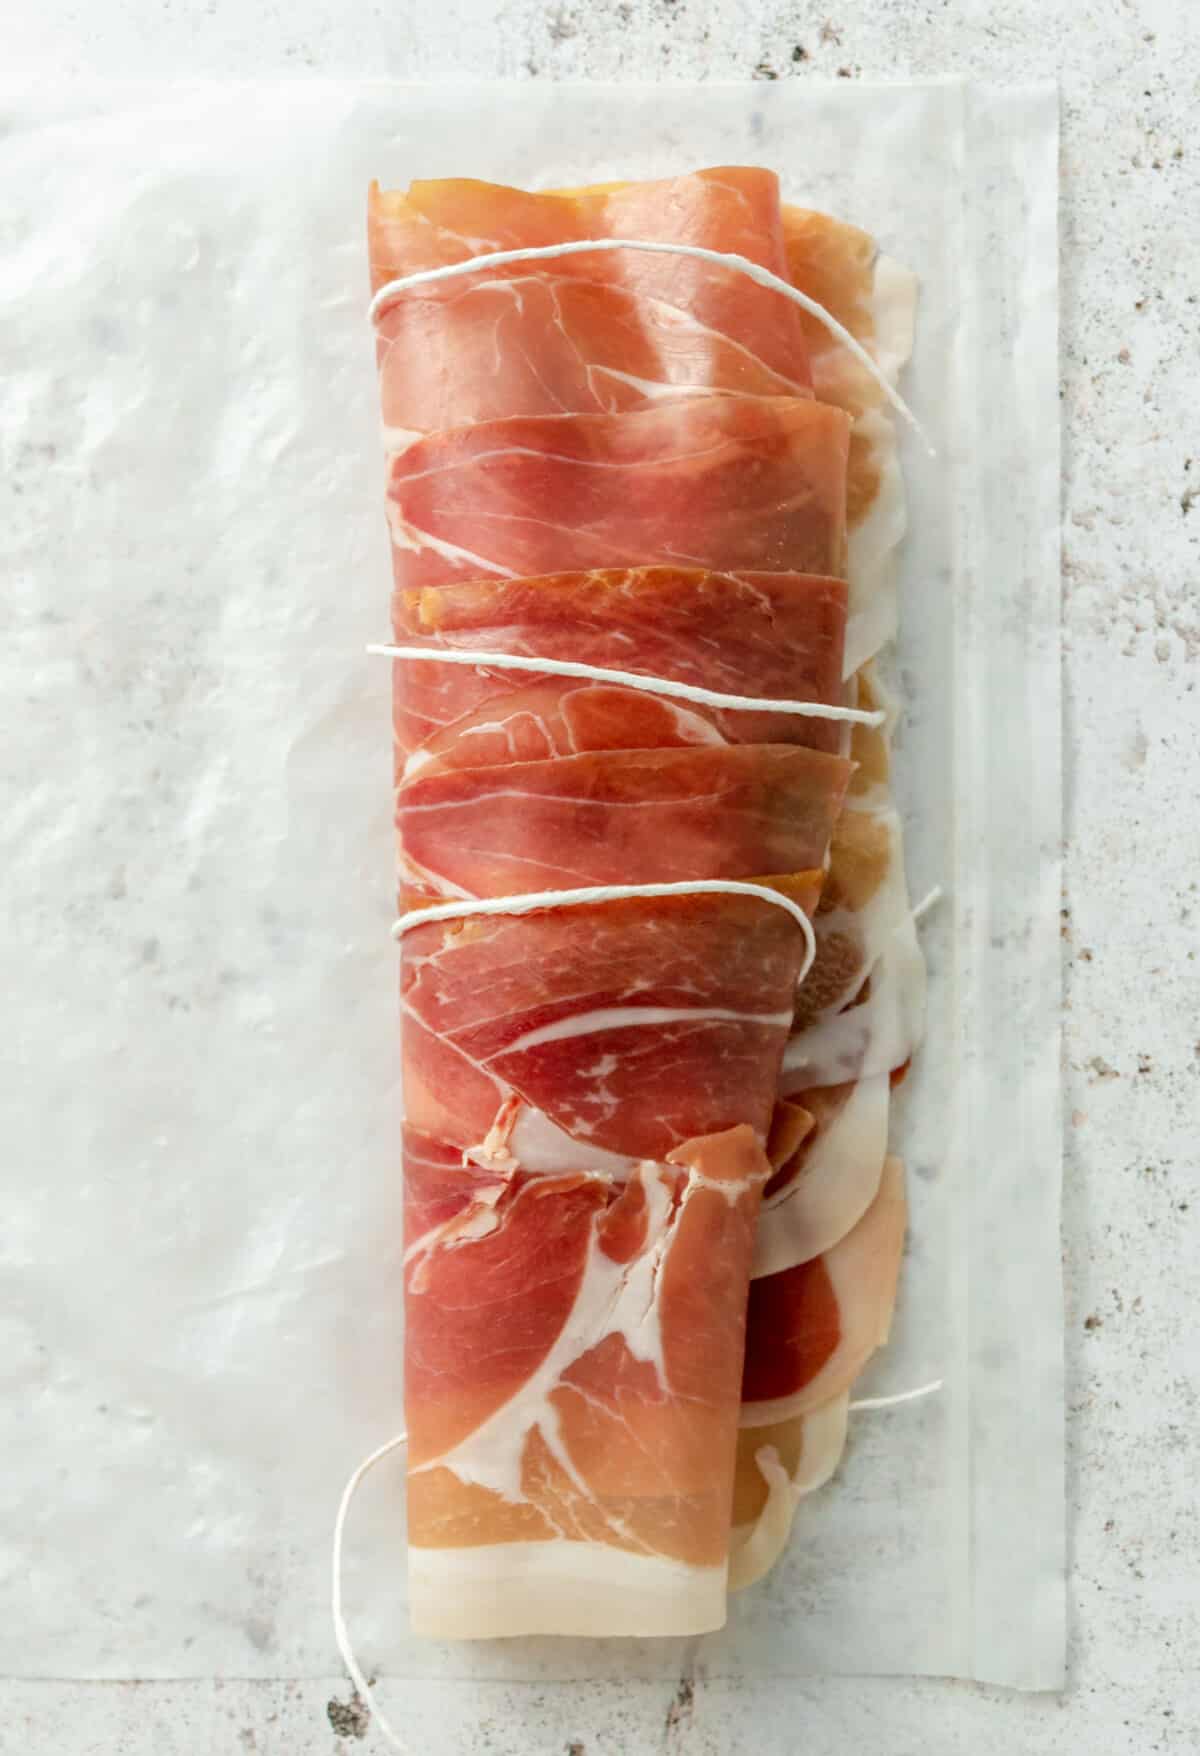 A piece of cooking string is shown aiding in wrapping the prosciutto around the chicken breast.